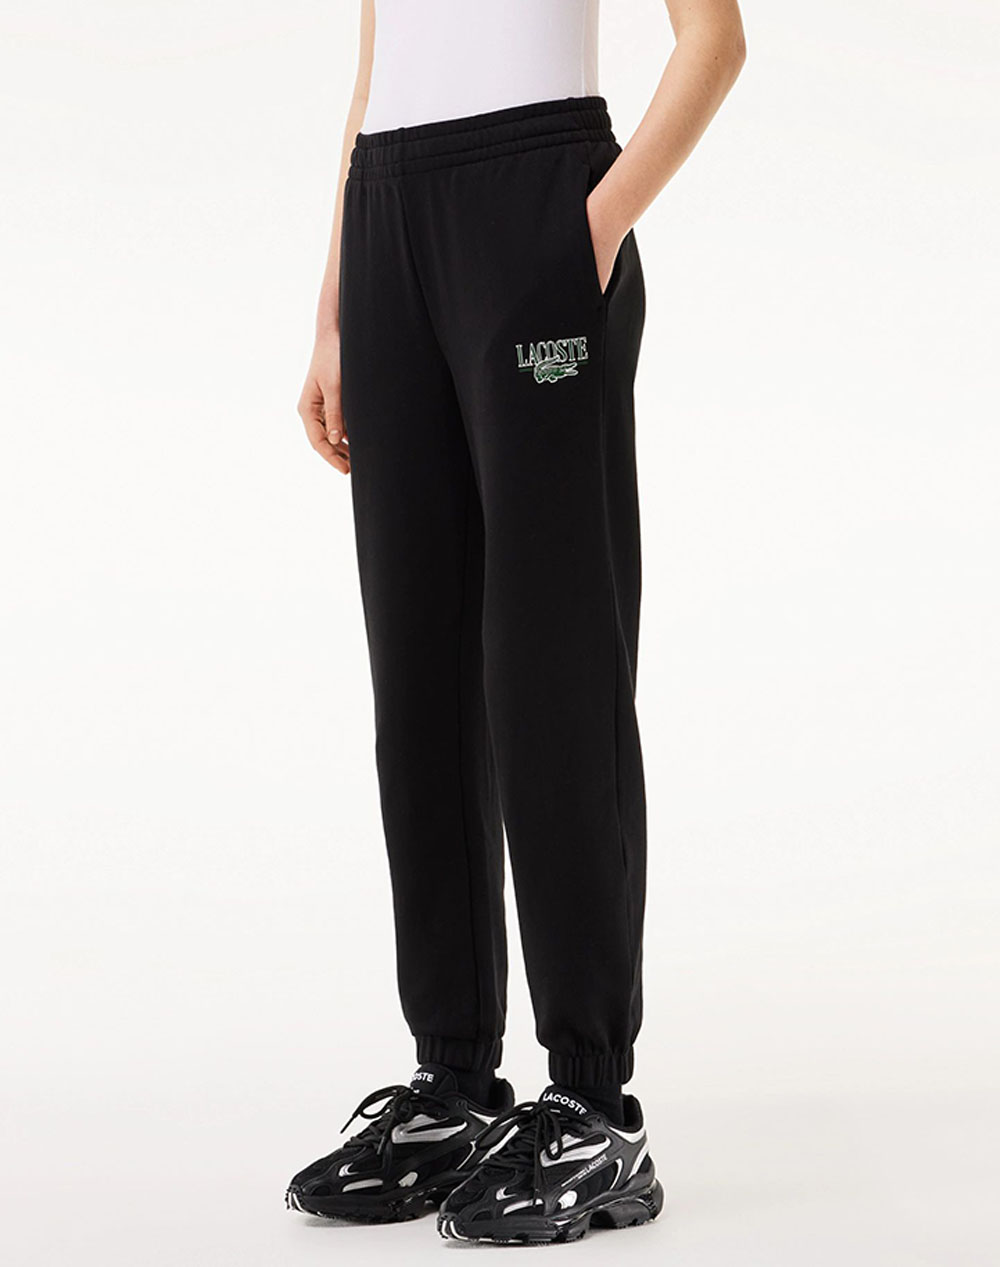 LACOSTE ΠΑΝΤΕΛΟΝΙ ΦΟΡΜΑΣ TRACKSUIT TROUSERS 3XF1710-031 Black